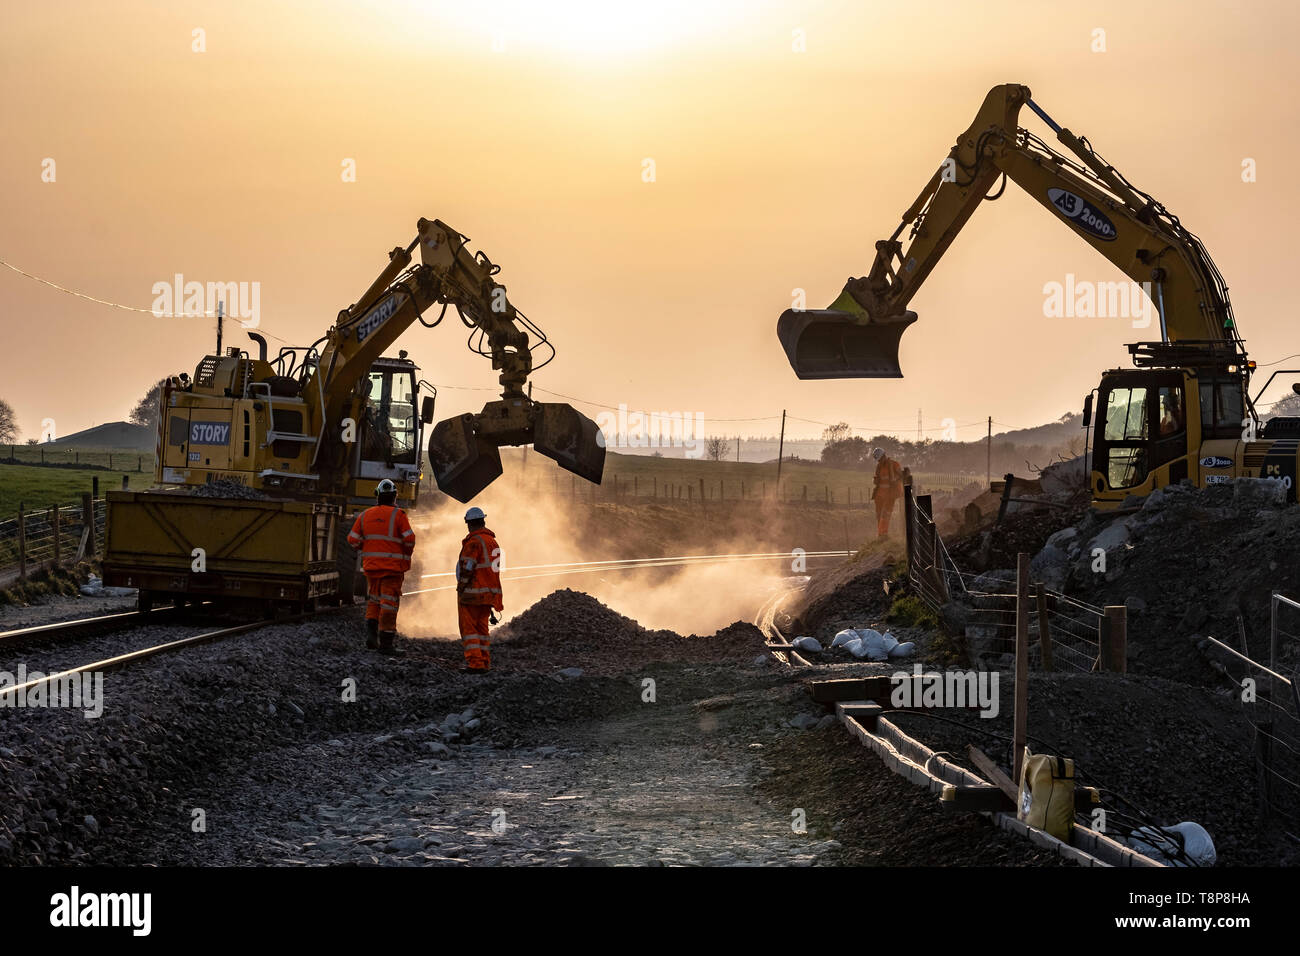 Railway workers constructing railway and finishing shift at sunset Stock Photo